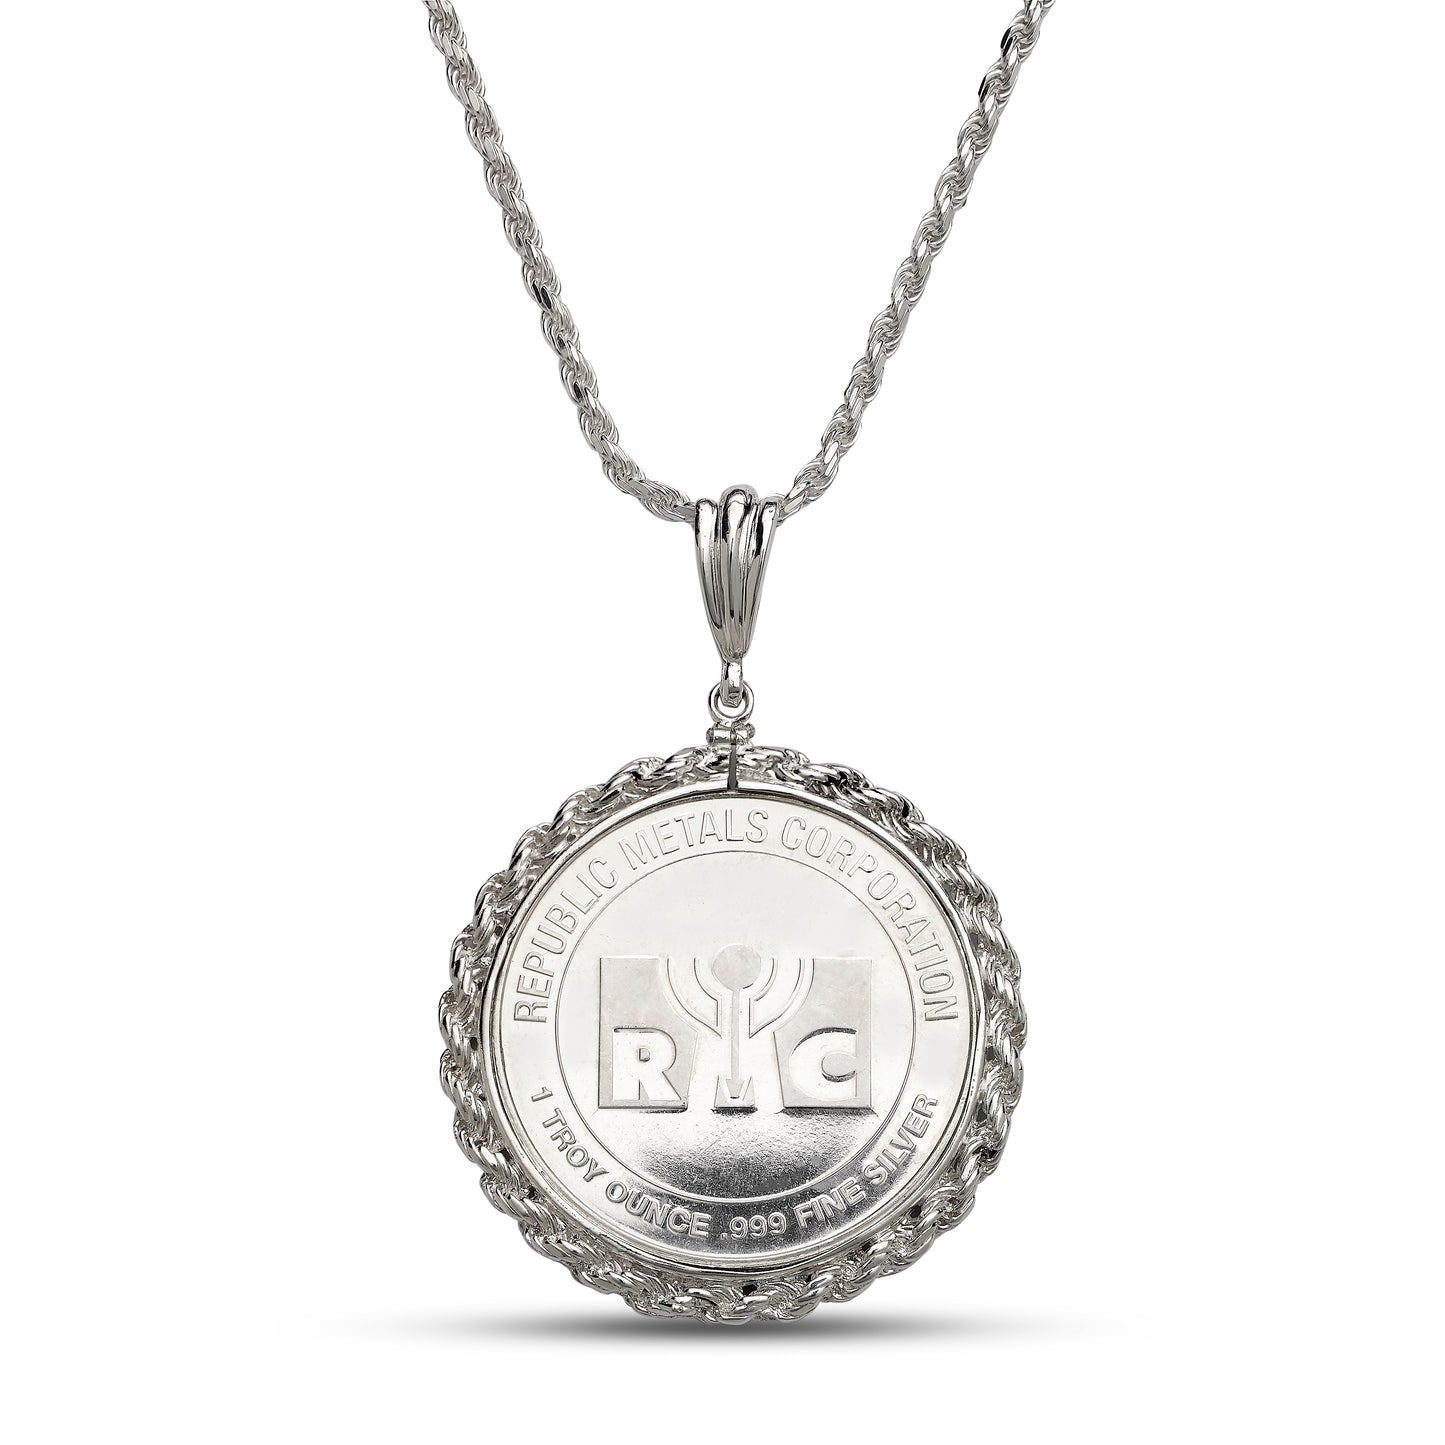 .999 Fine Pure Silver Coin with .925 Solid Sterling Silver Pendant Bezel Frame on Silver Rope Chain or Without Chain